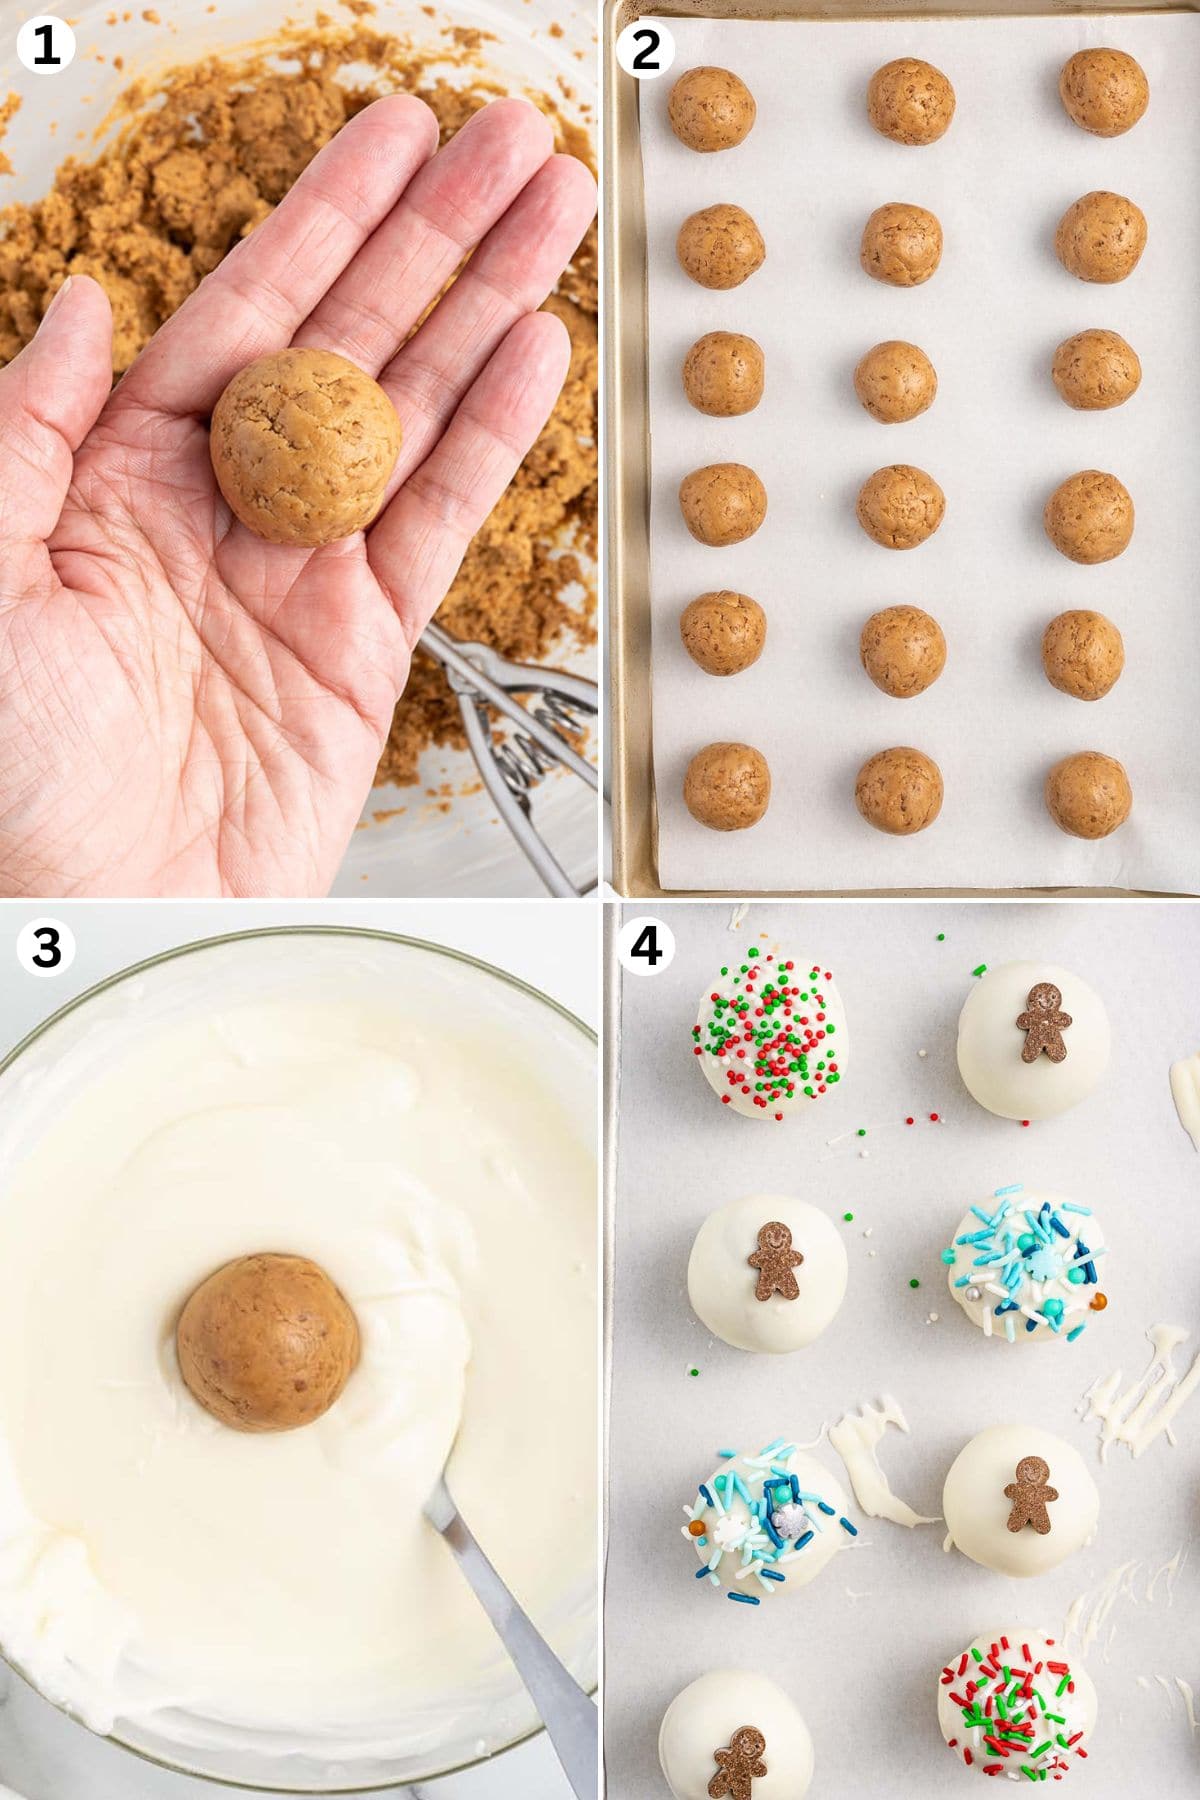 rolling gingerbread truffle mixture into a ball and line it up in baking sheet. dip the ball into melted white chocolate. adding sprinkle into the truffle. 